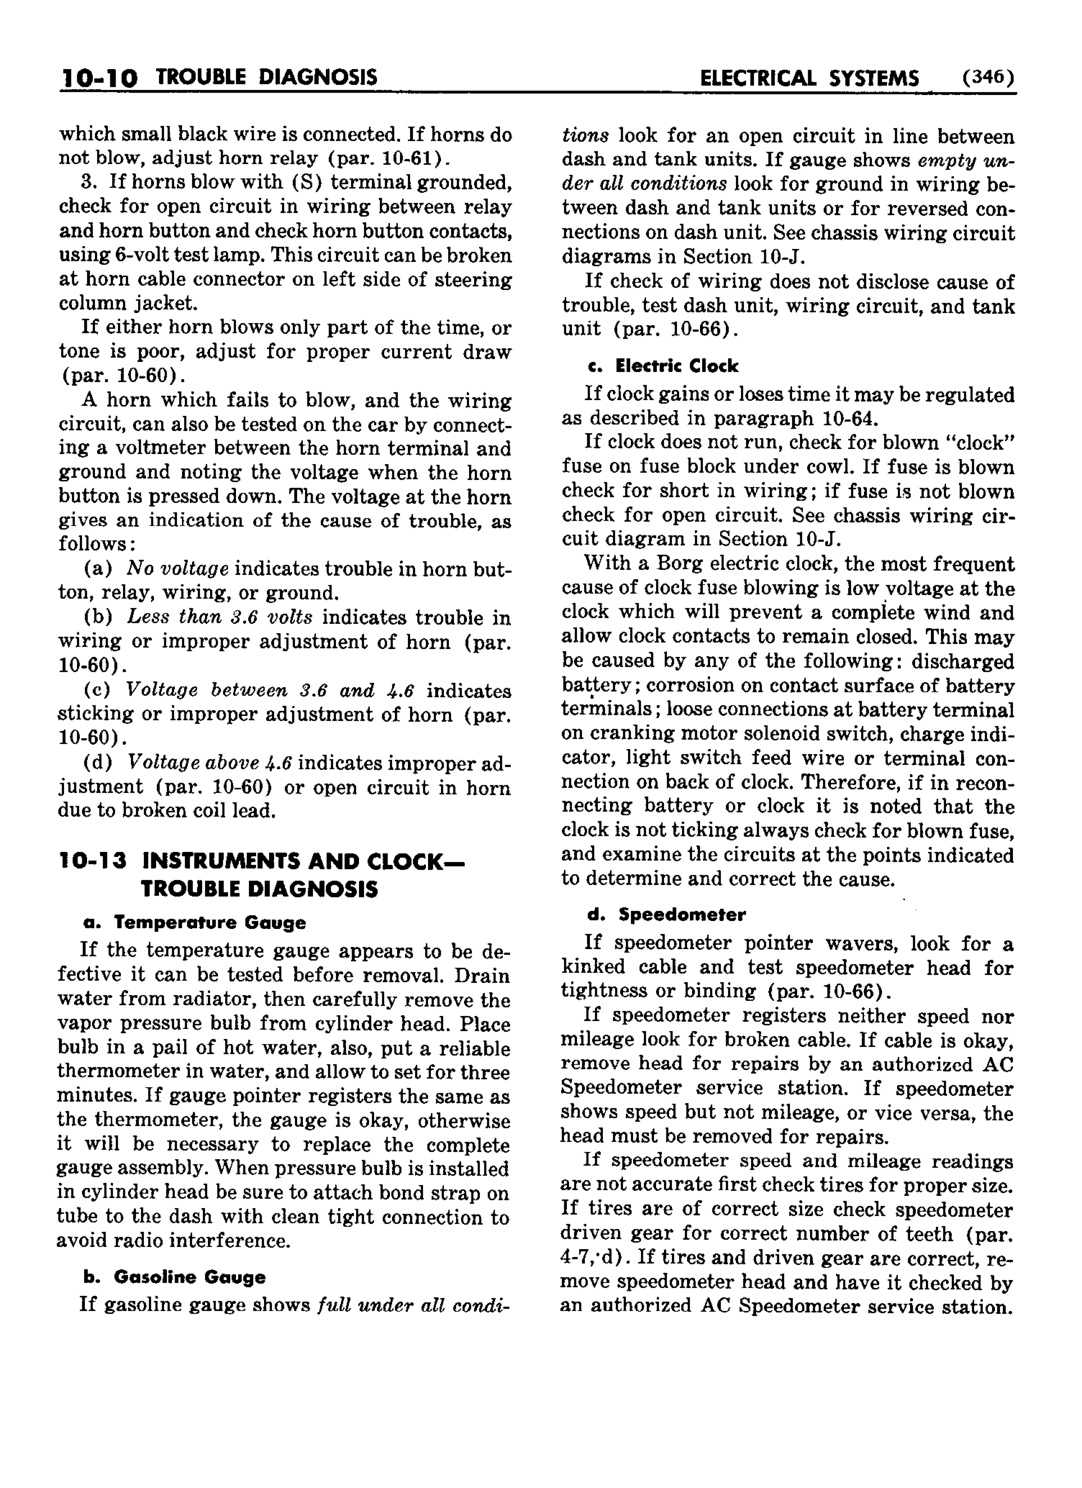 n_11 1952 Buick Shop Manual - Electrical Systems-010-010.jpg